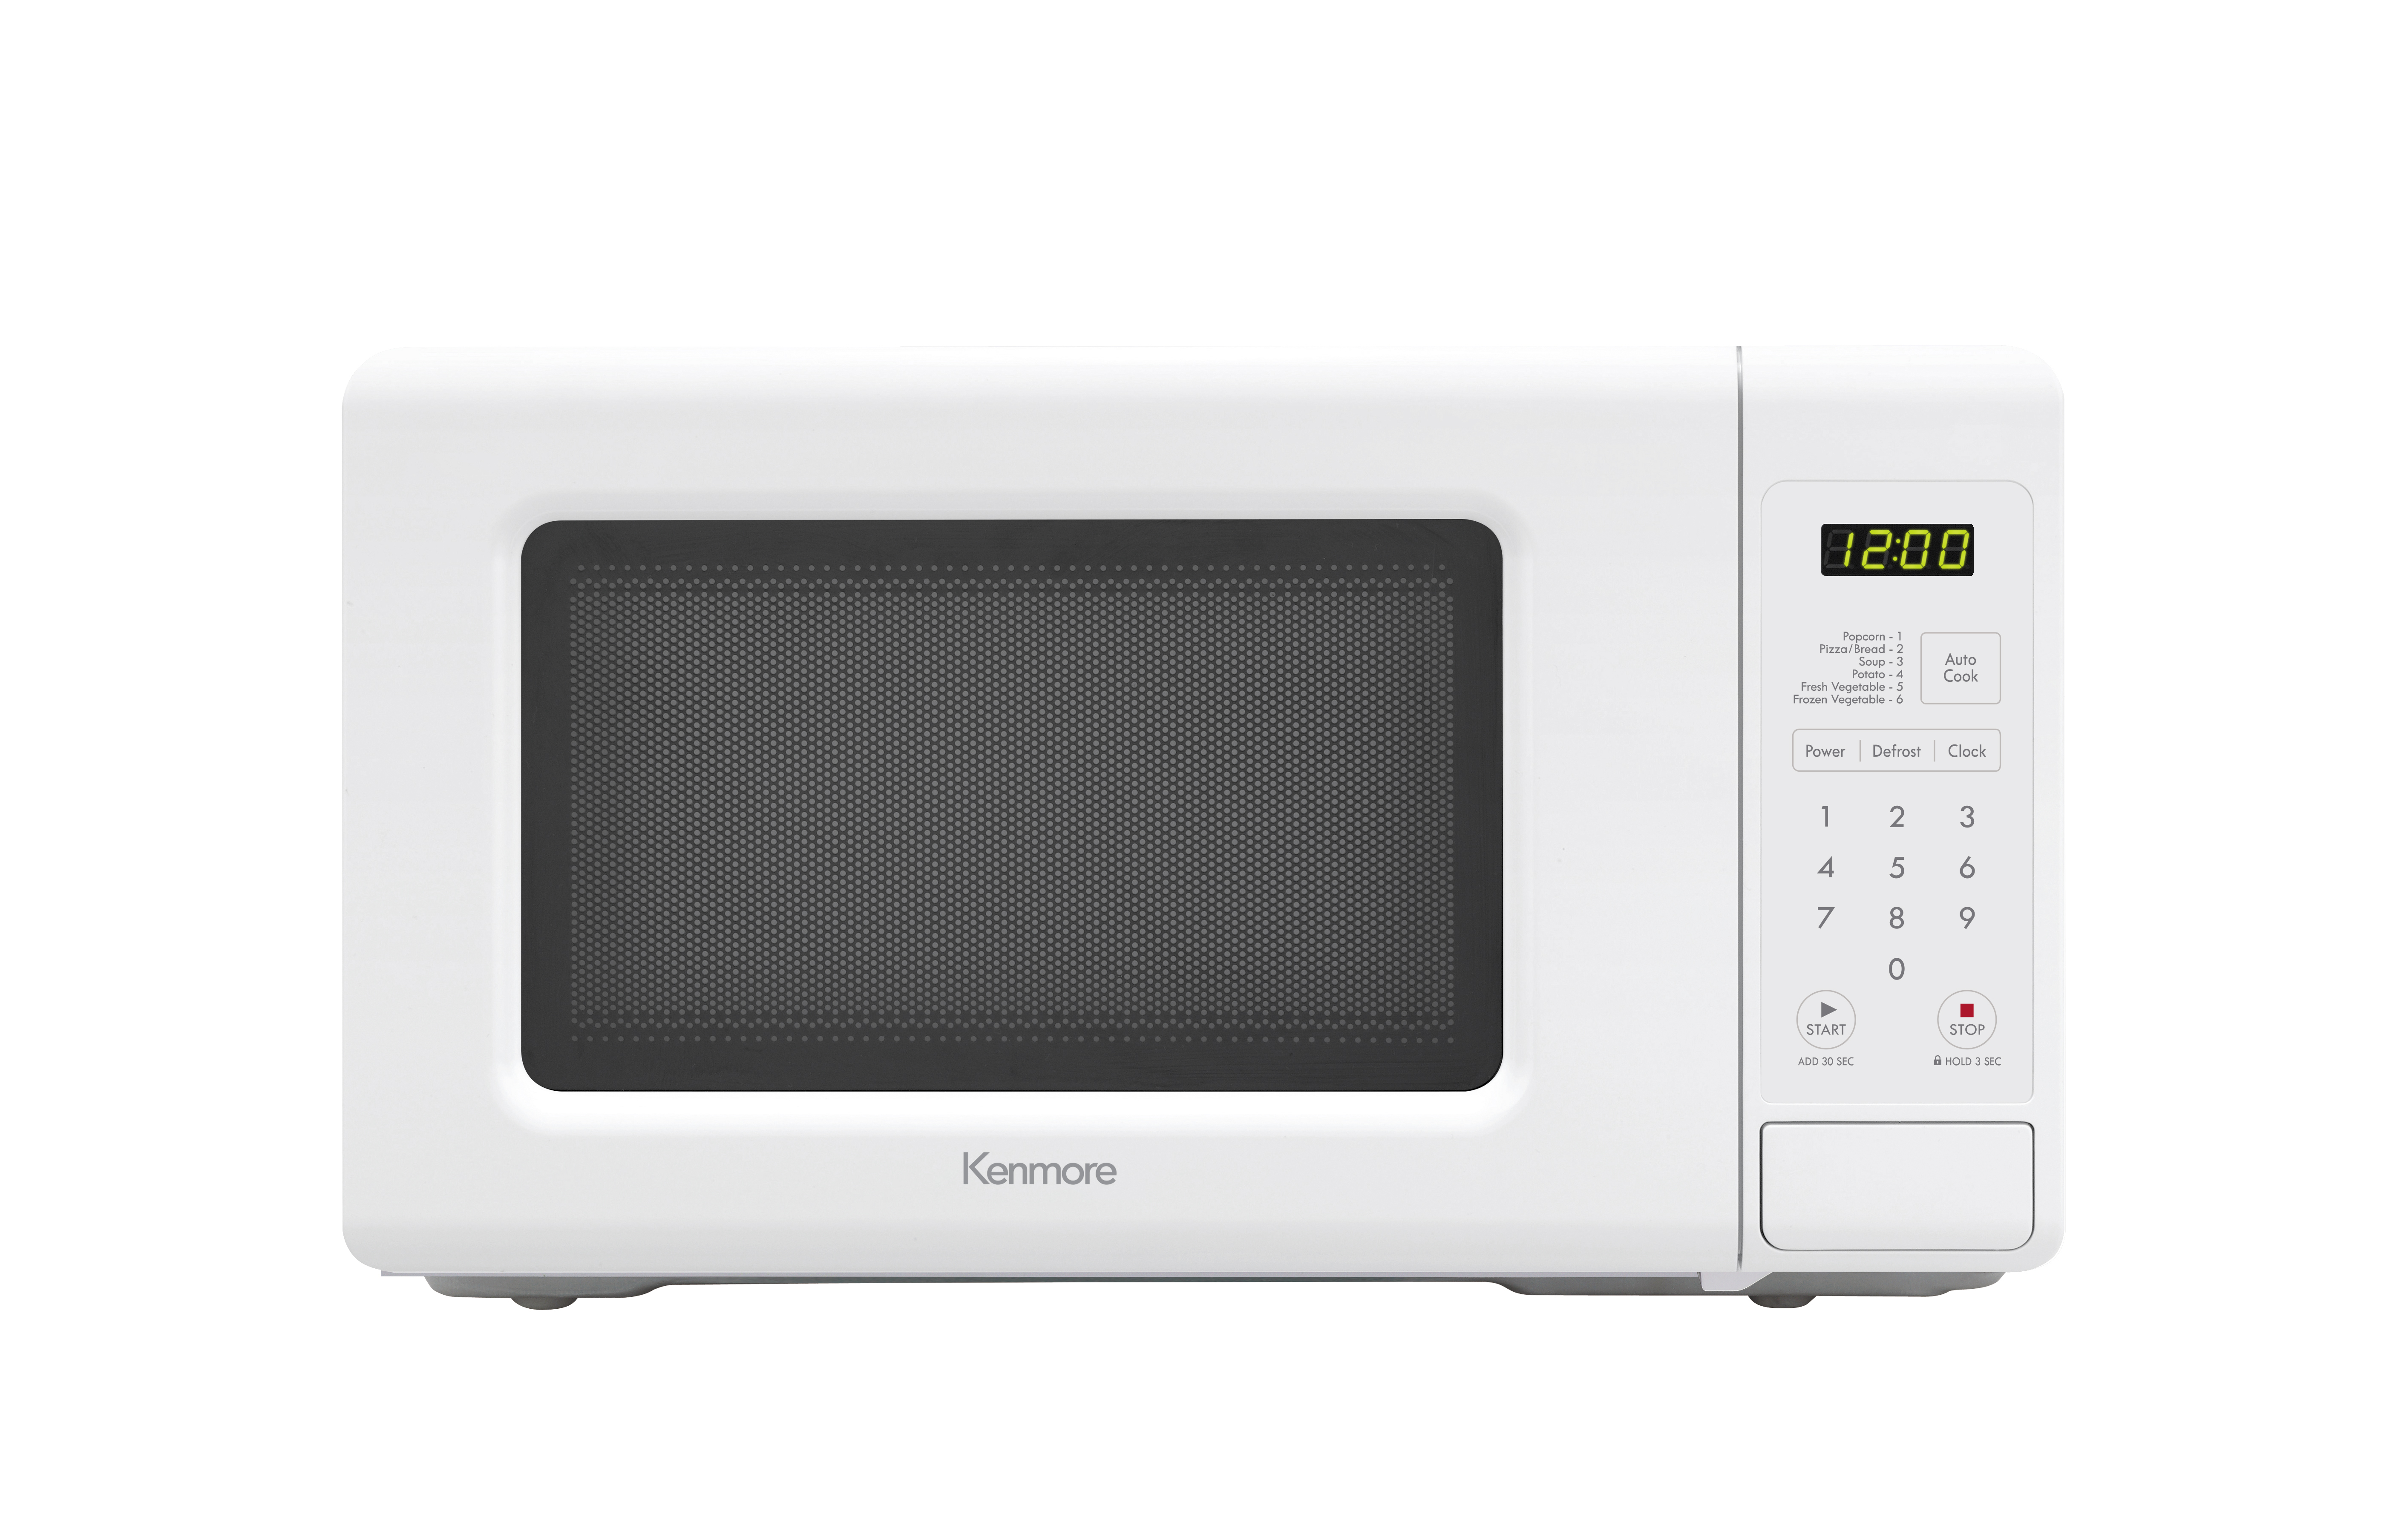 Kenmore 70712 0.7 cu. ft. Countertop Microwave Oven - White